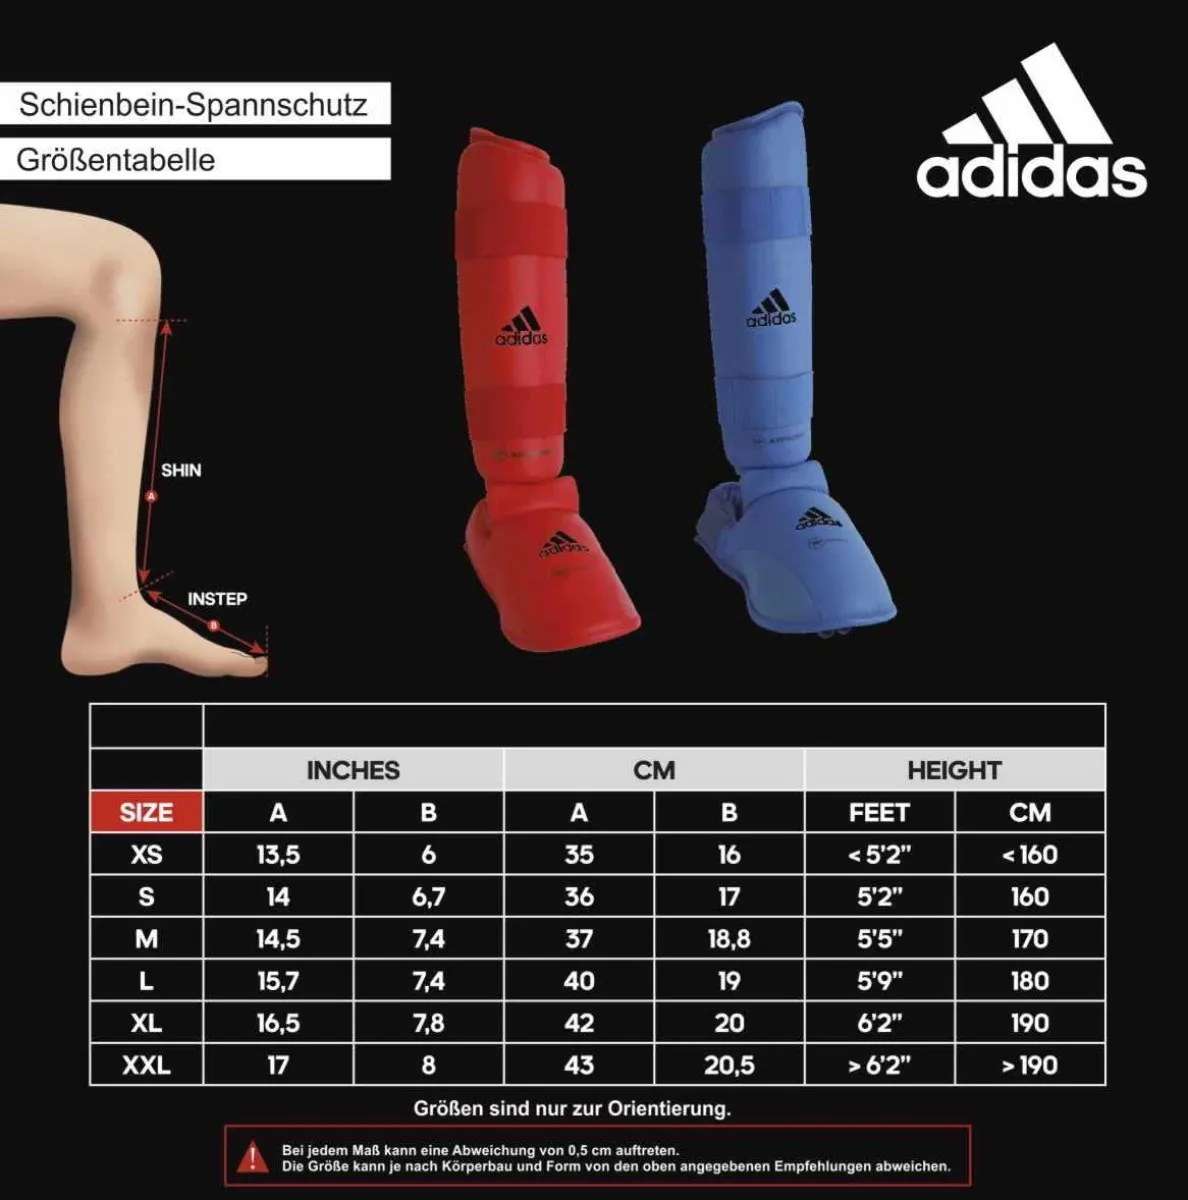 Adidas shin guard WKF approved red